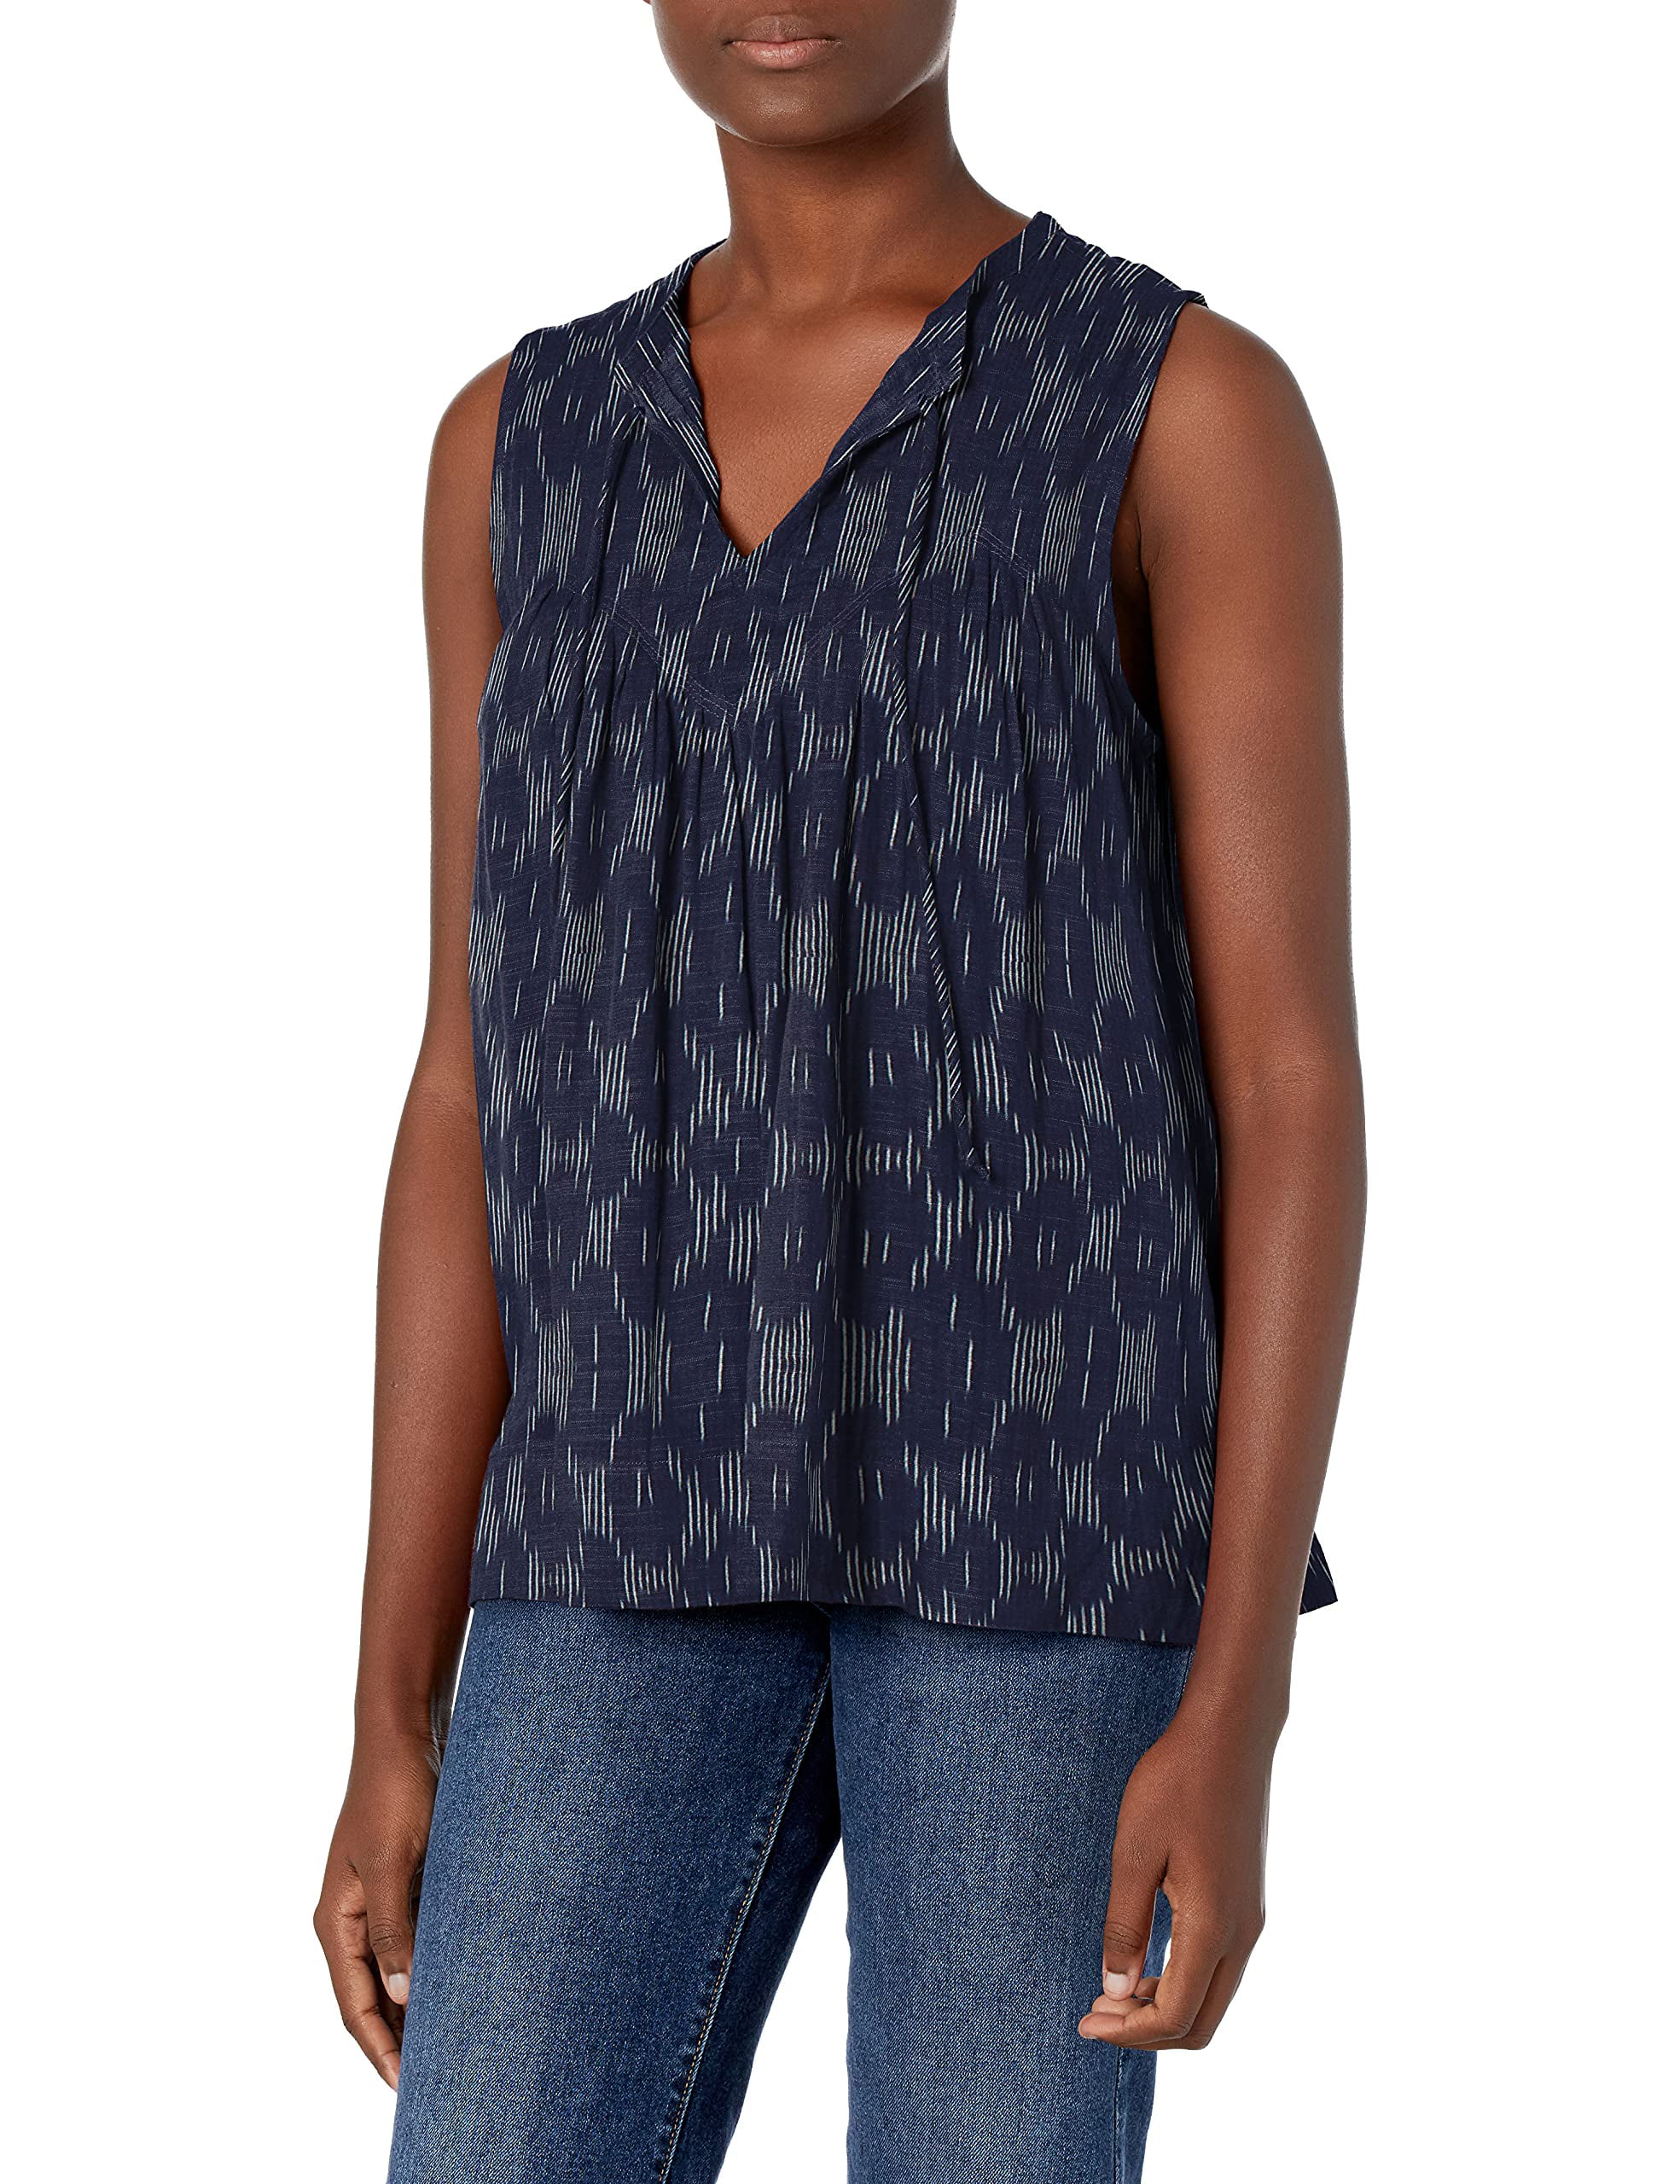 MSRP $70 Lucky Brand Women's Sleeveless Tie Neck Cami Top Navy Size Small 